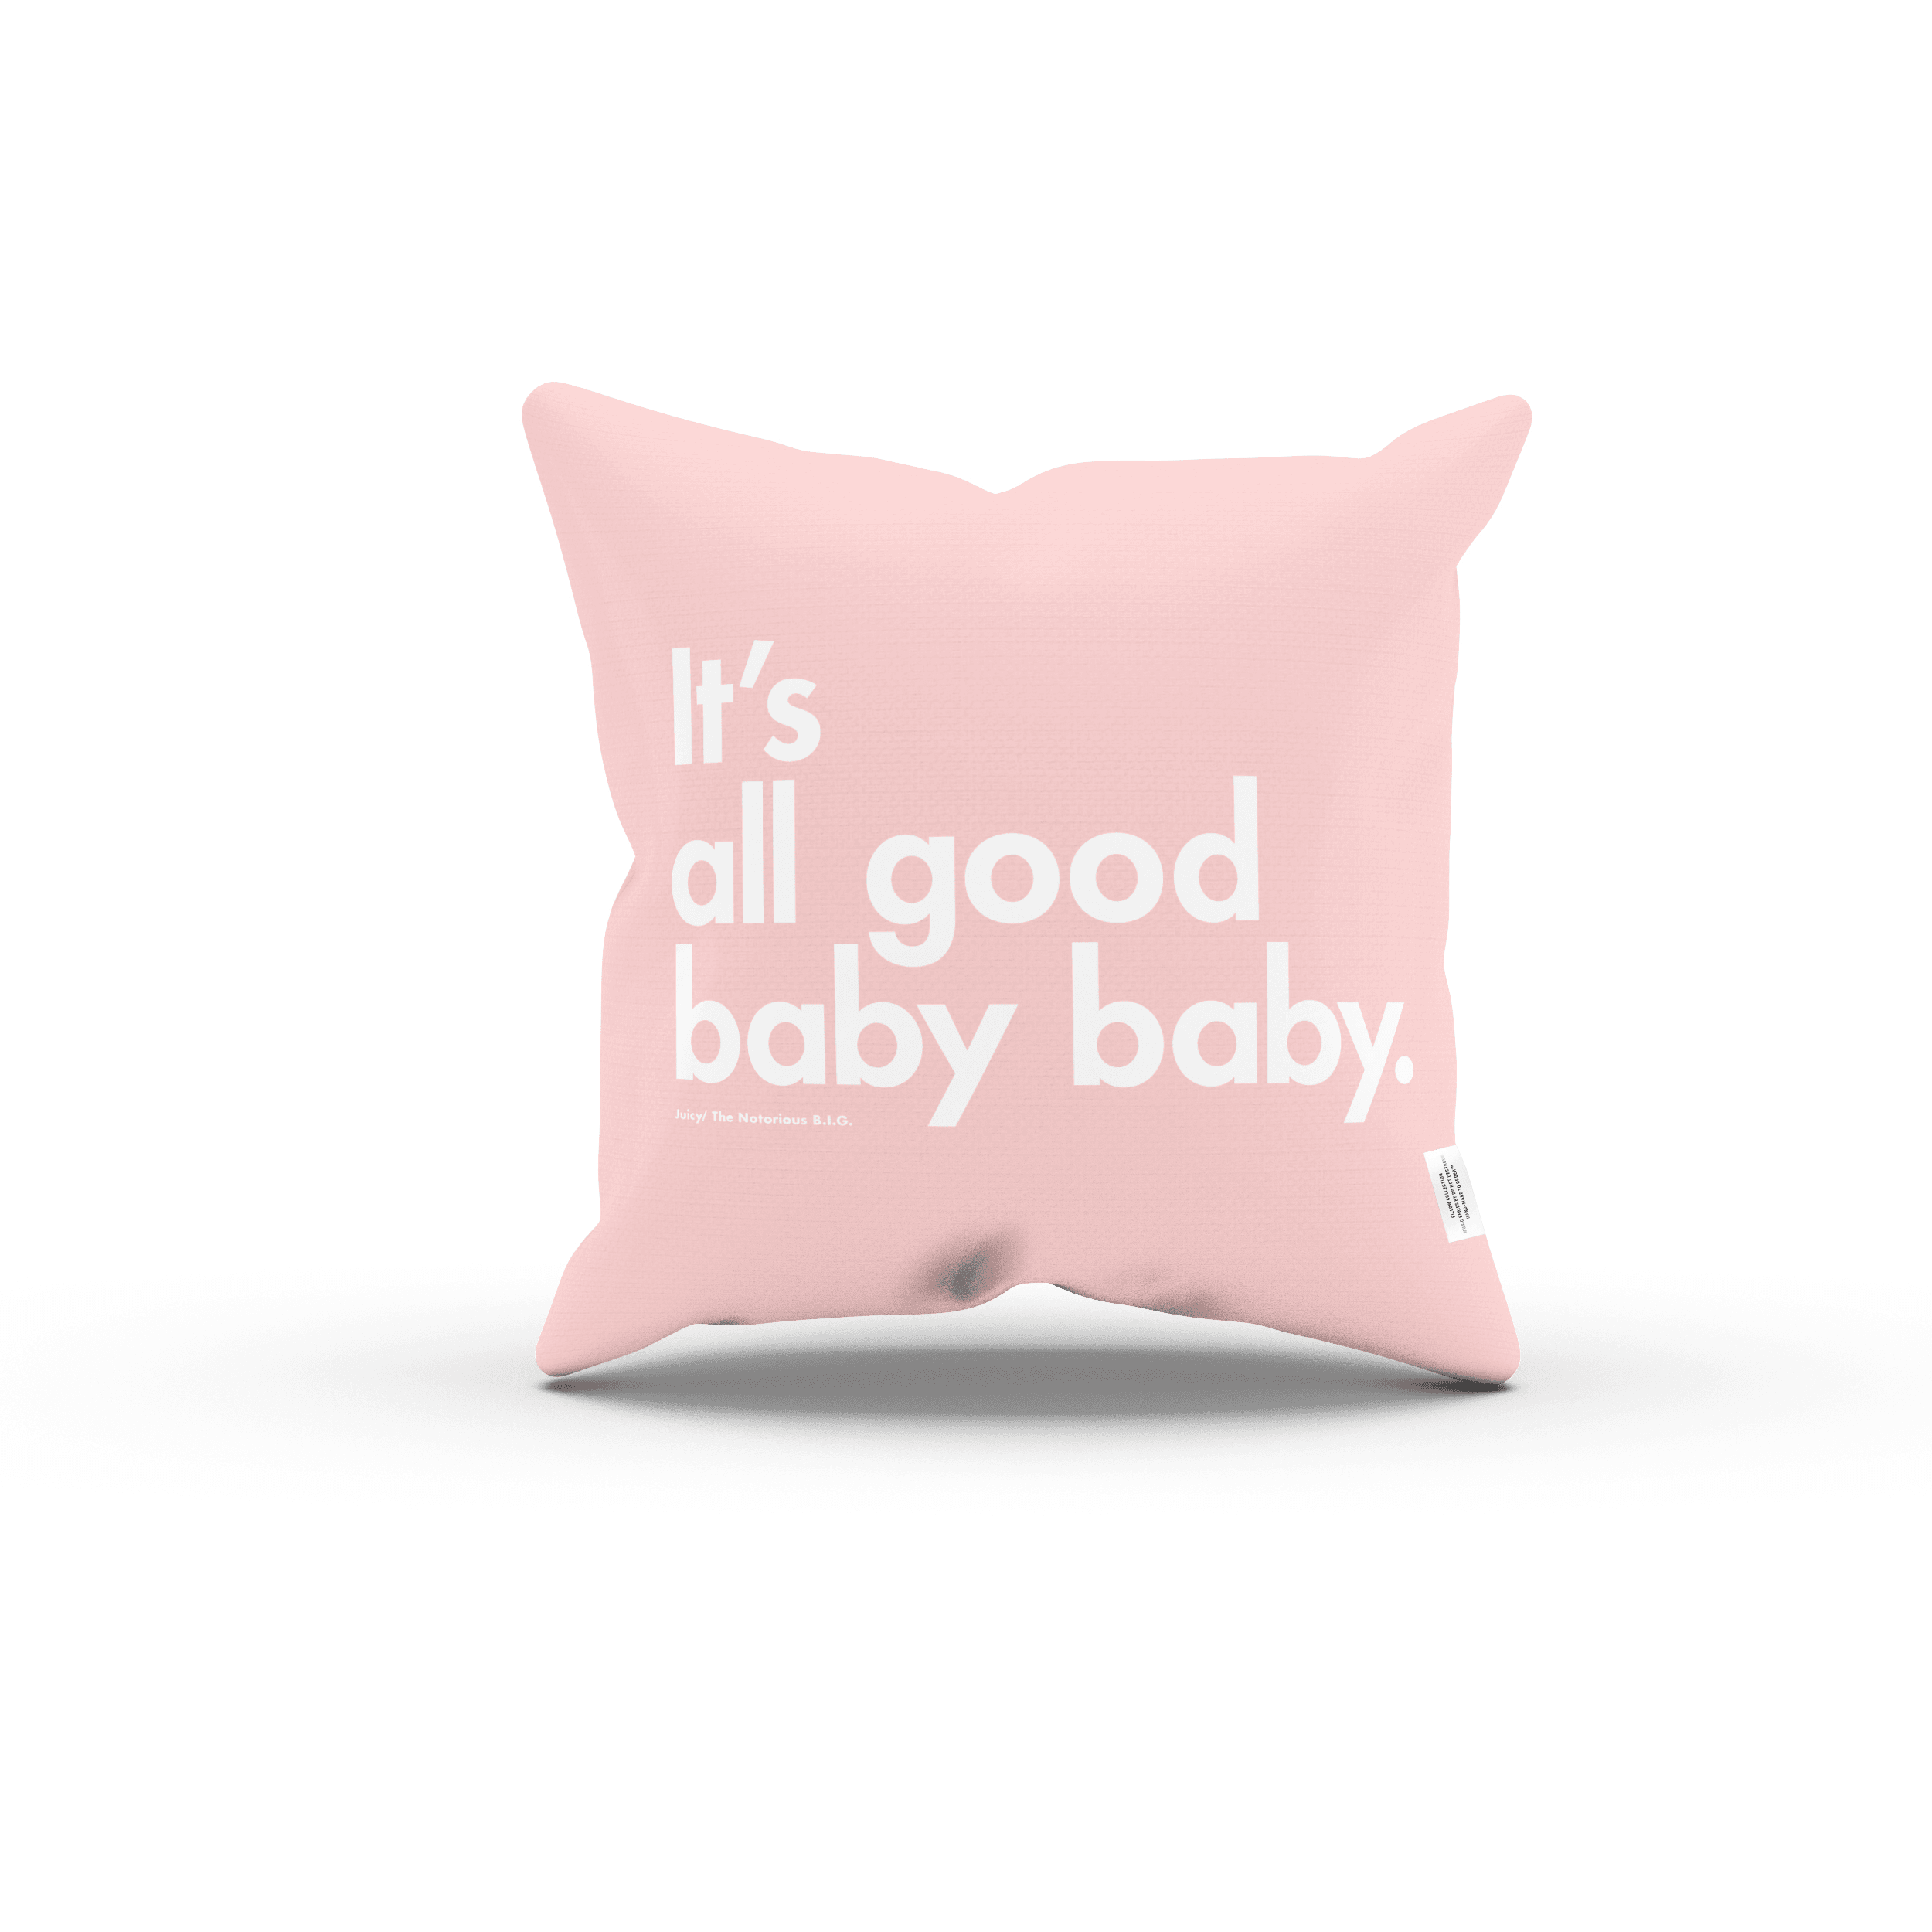  It’s All Good Baby Baby (Pink) Pillow